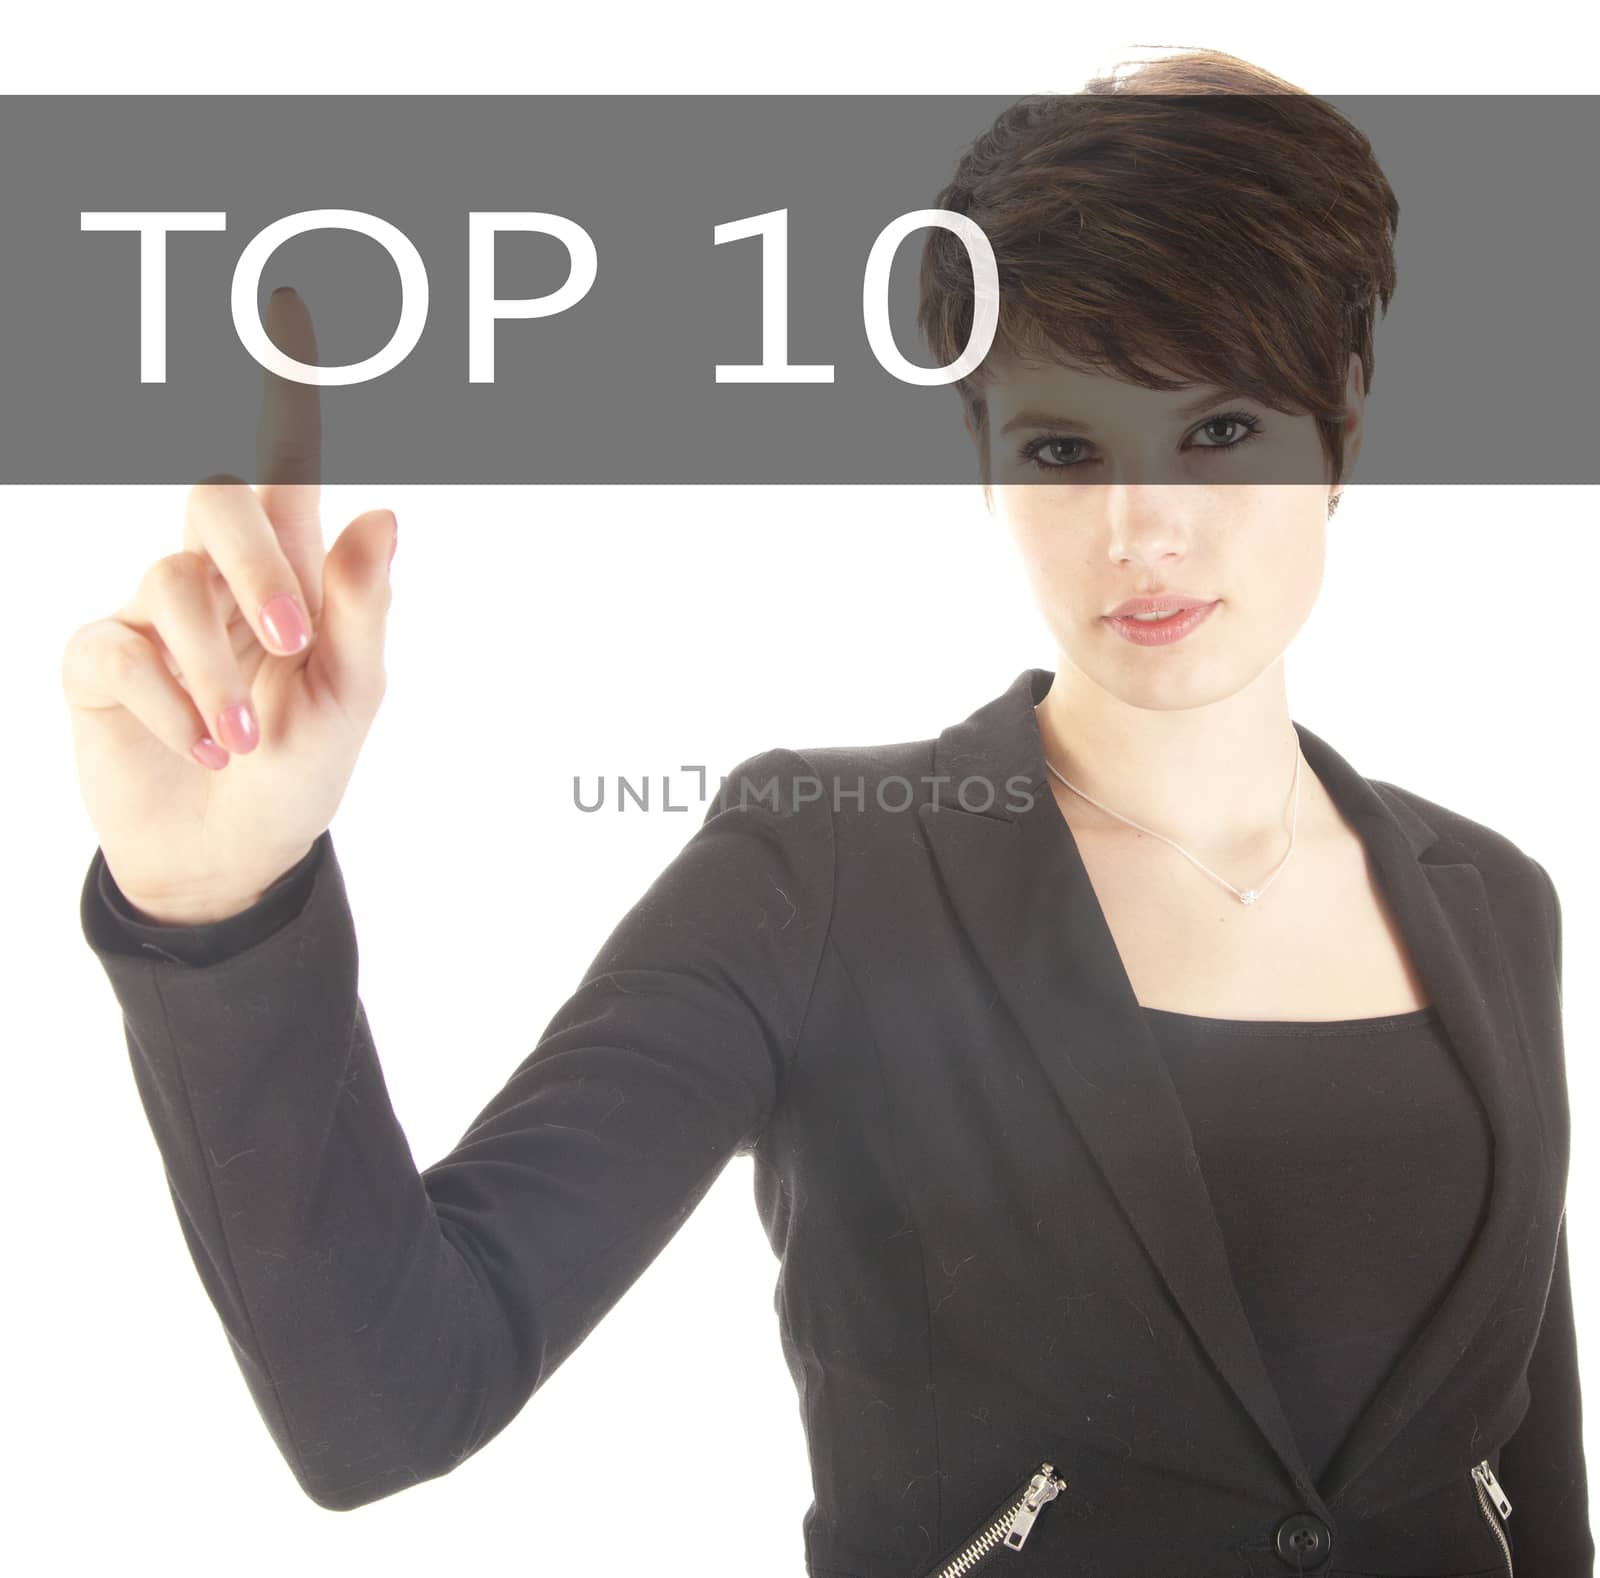 Business woman with top 10 sign on white background by gigra